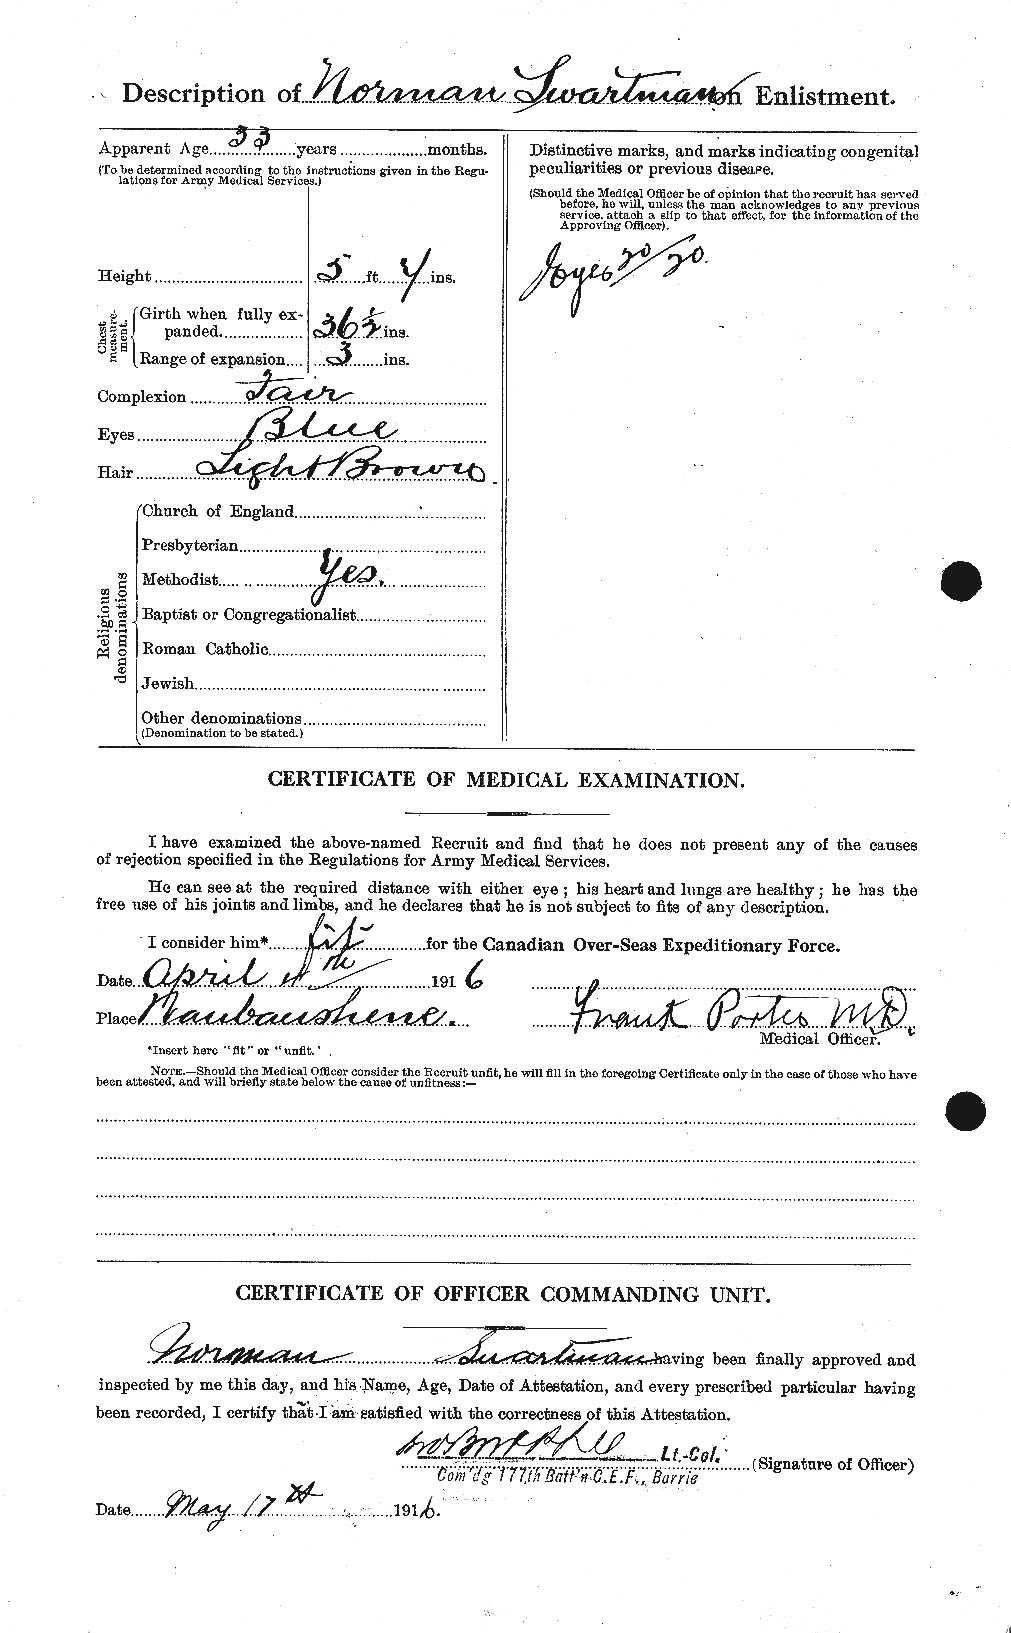 Personnel Records of the First World War - CEF 083811b